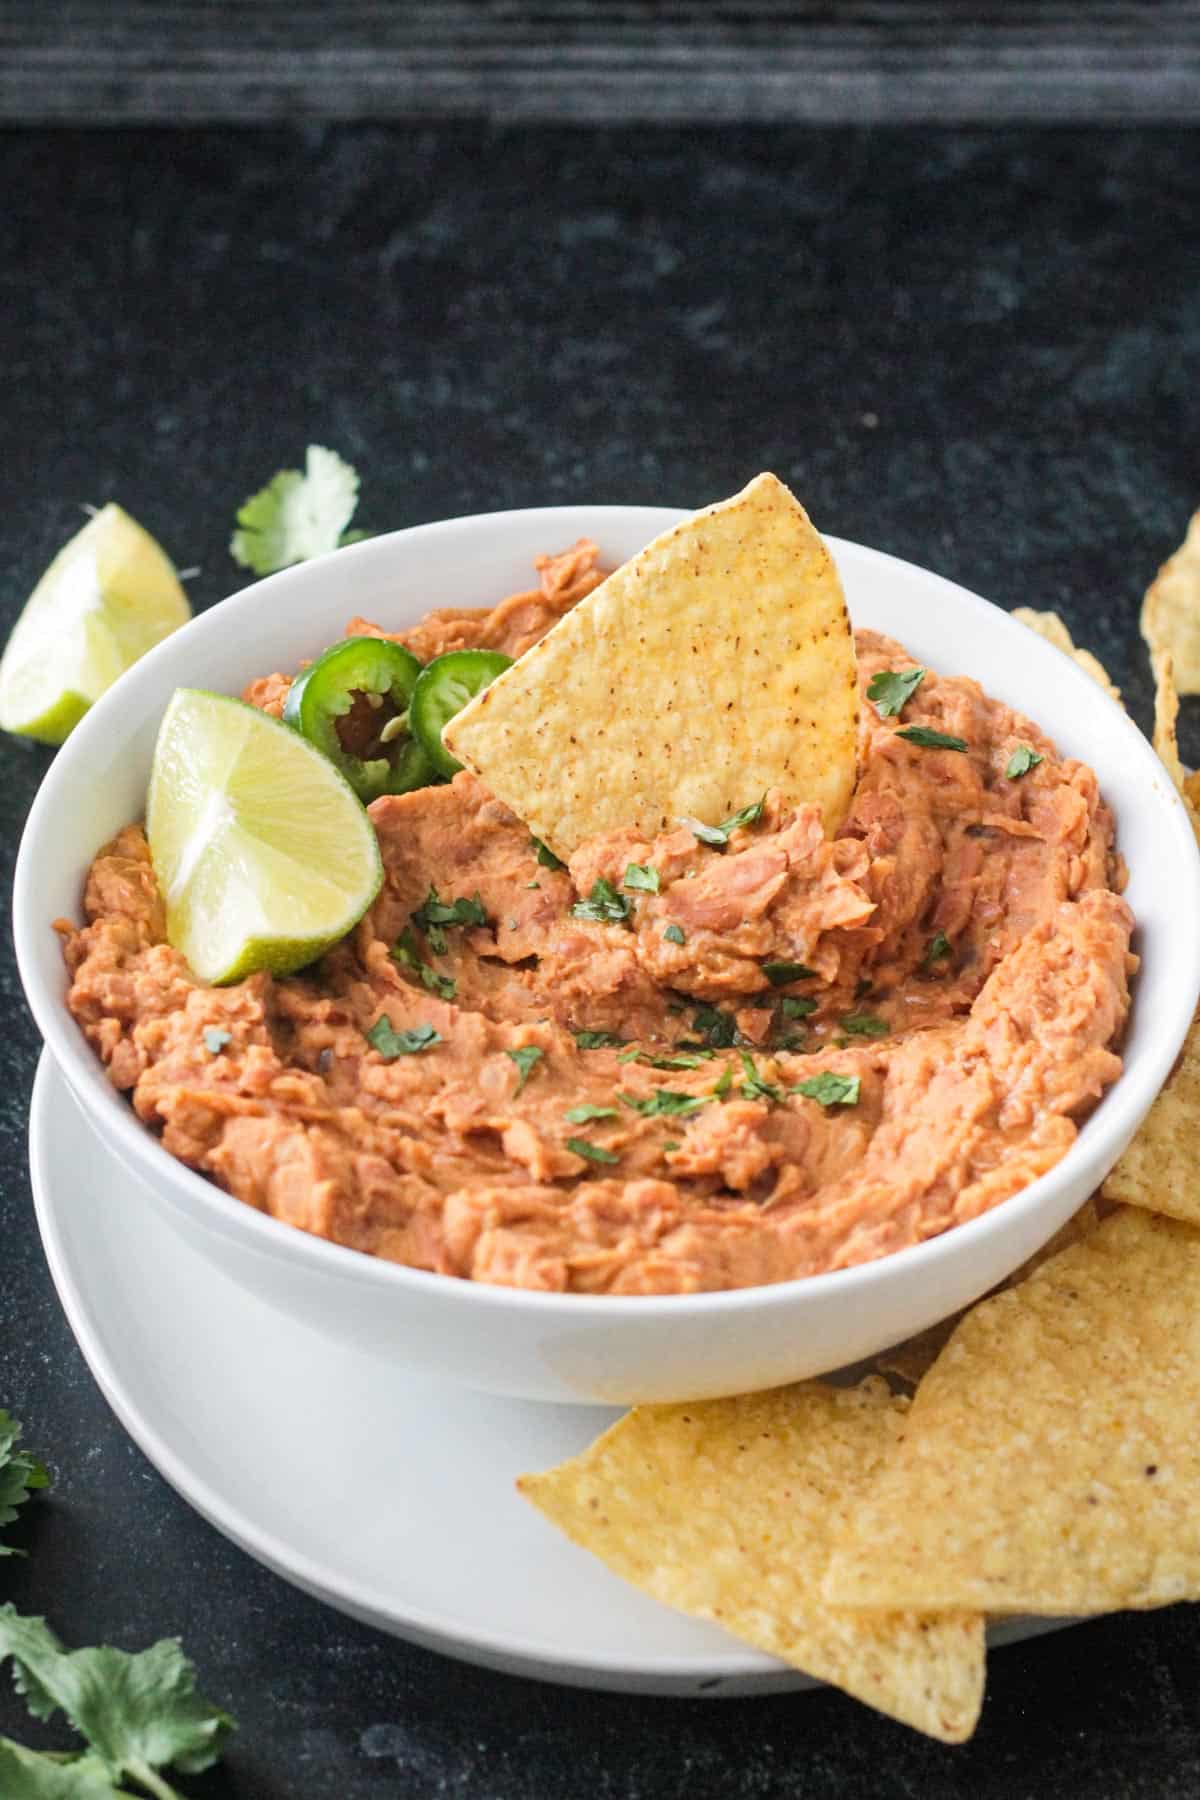 Tortilla chip standing up in a bowl of creamy pinto beans.